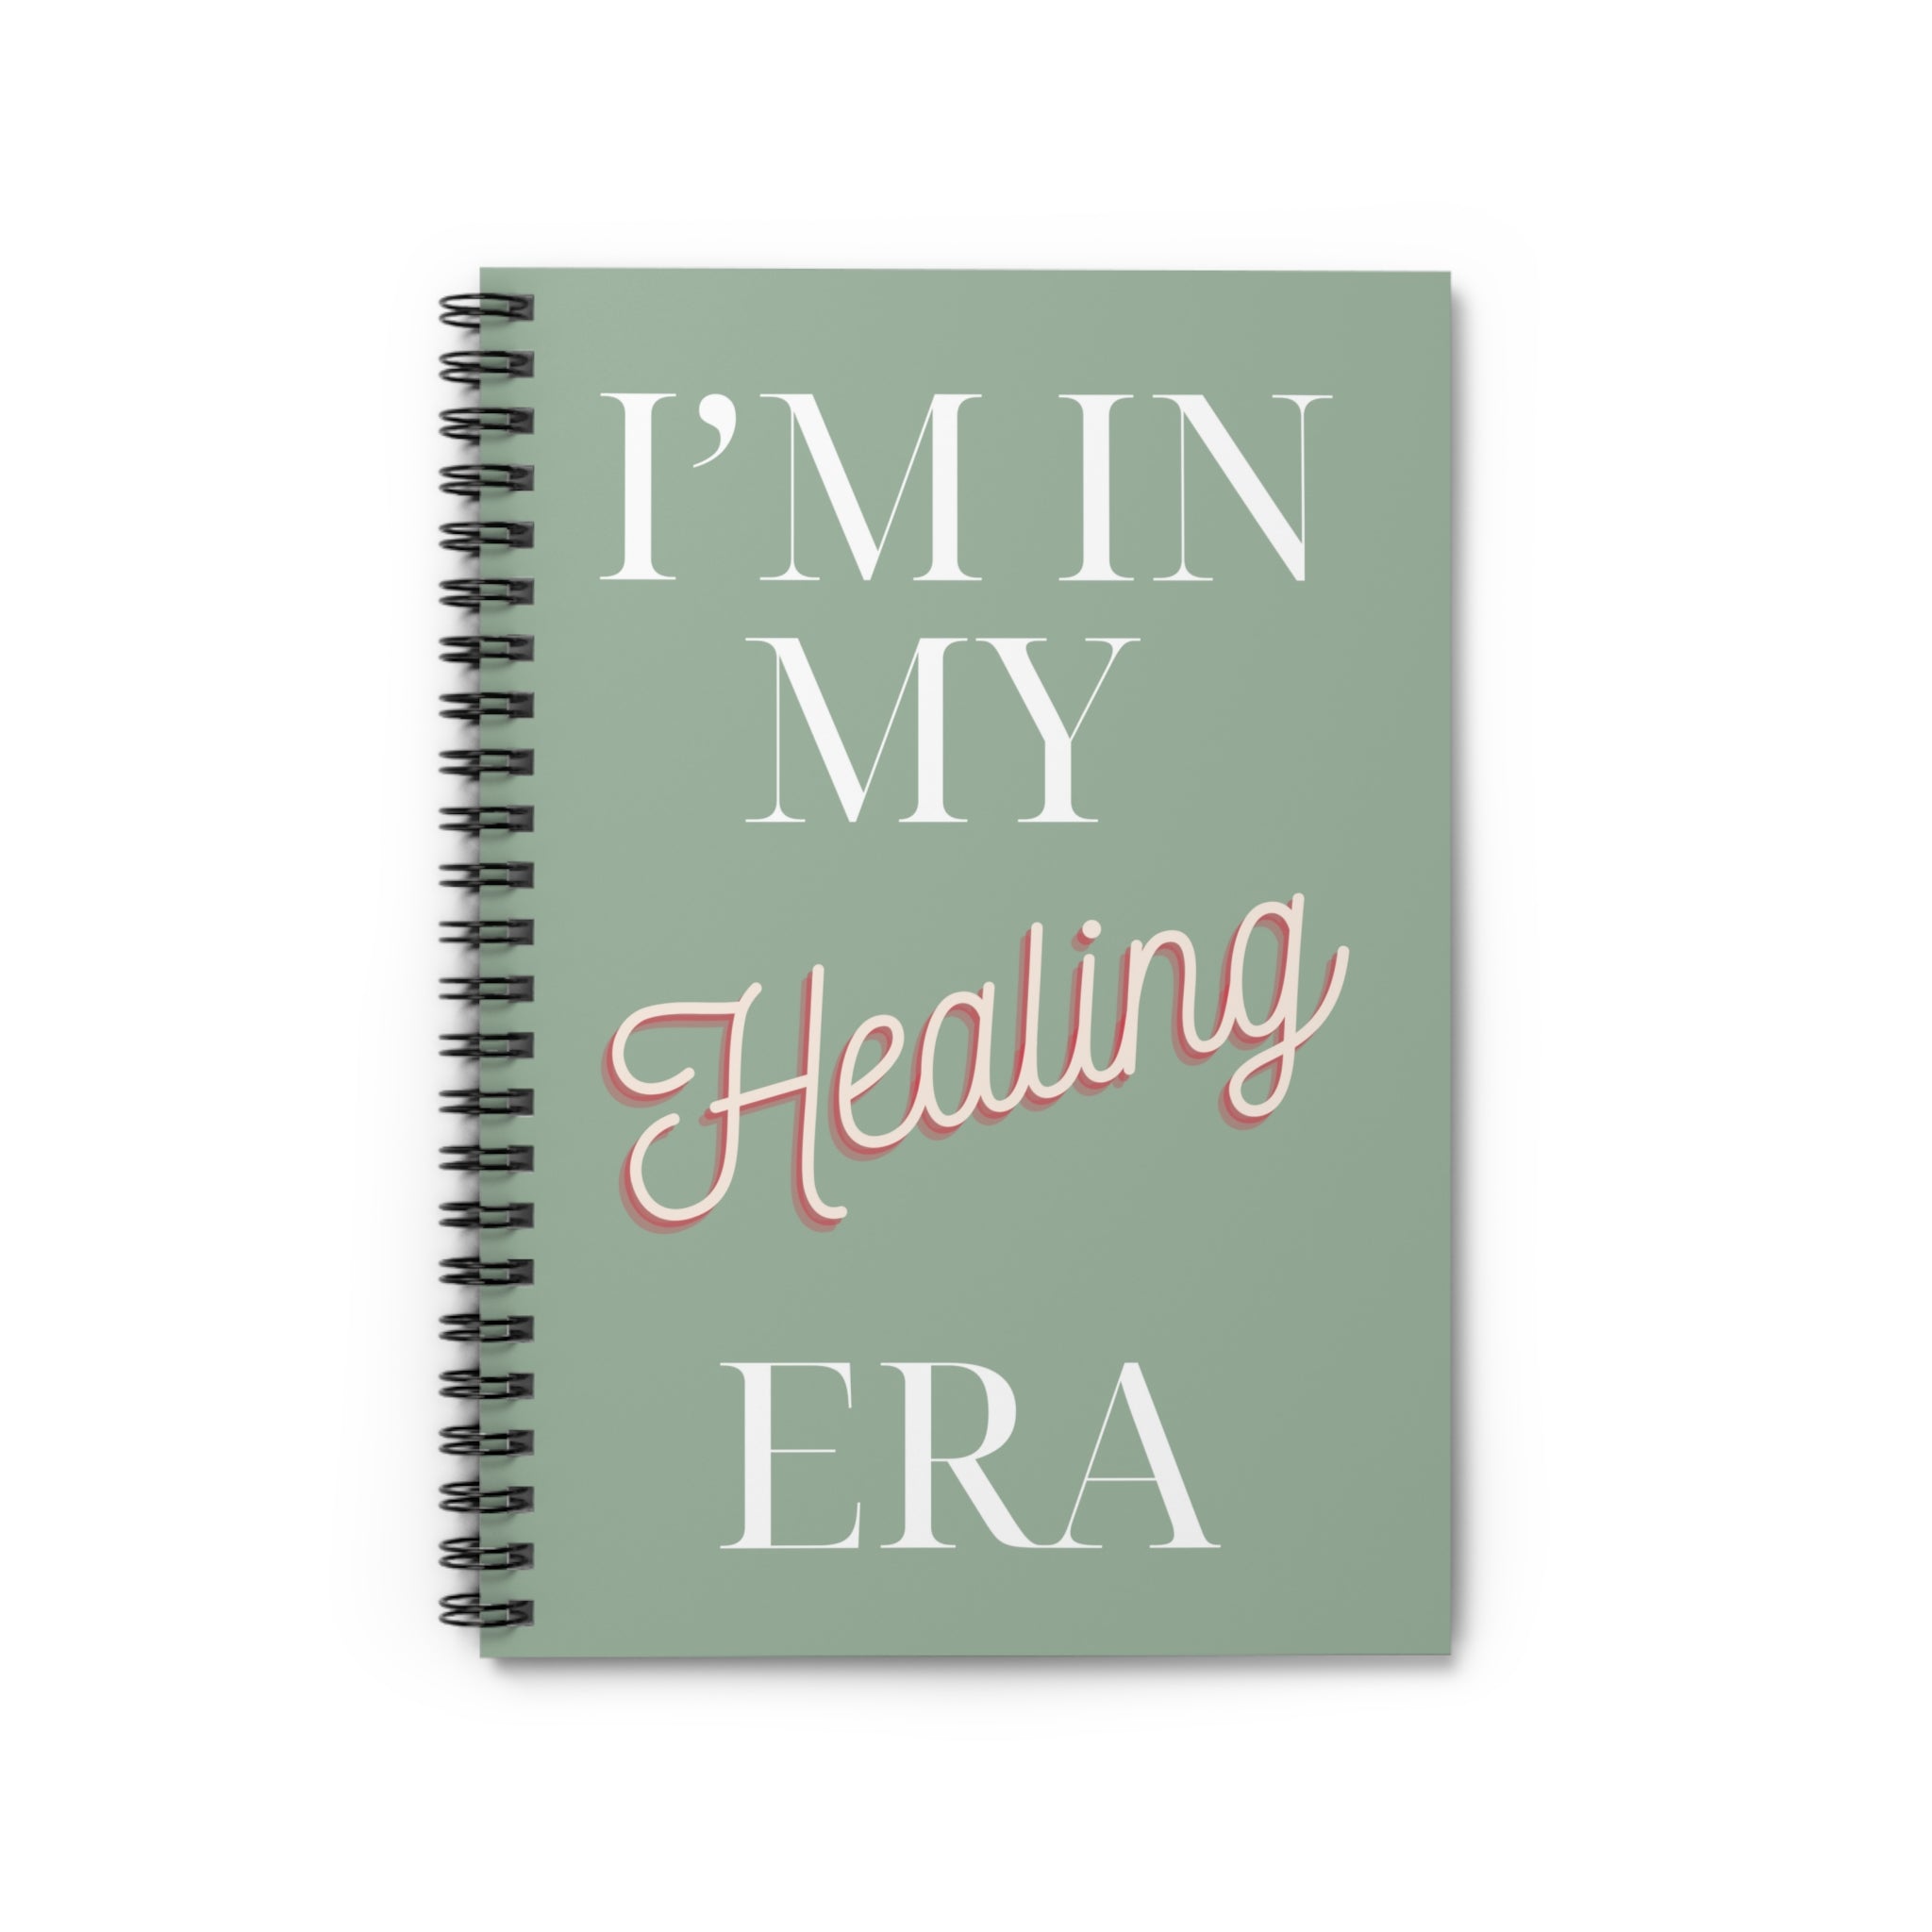 "I'm in my Healing Era" 6x8 Spiral Notebook - Ruled Line, 59 sheets